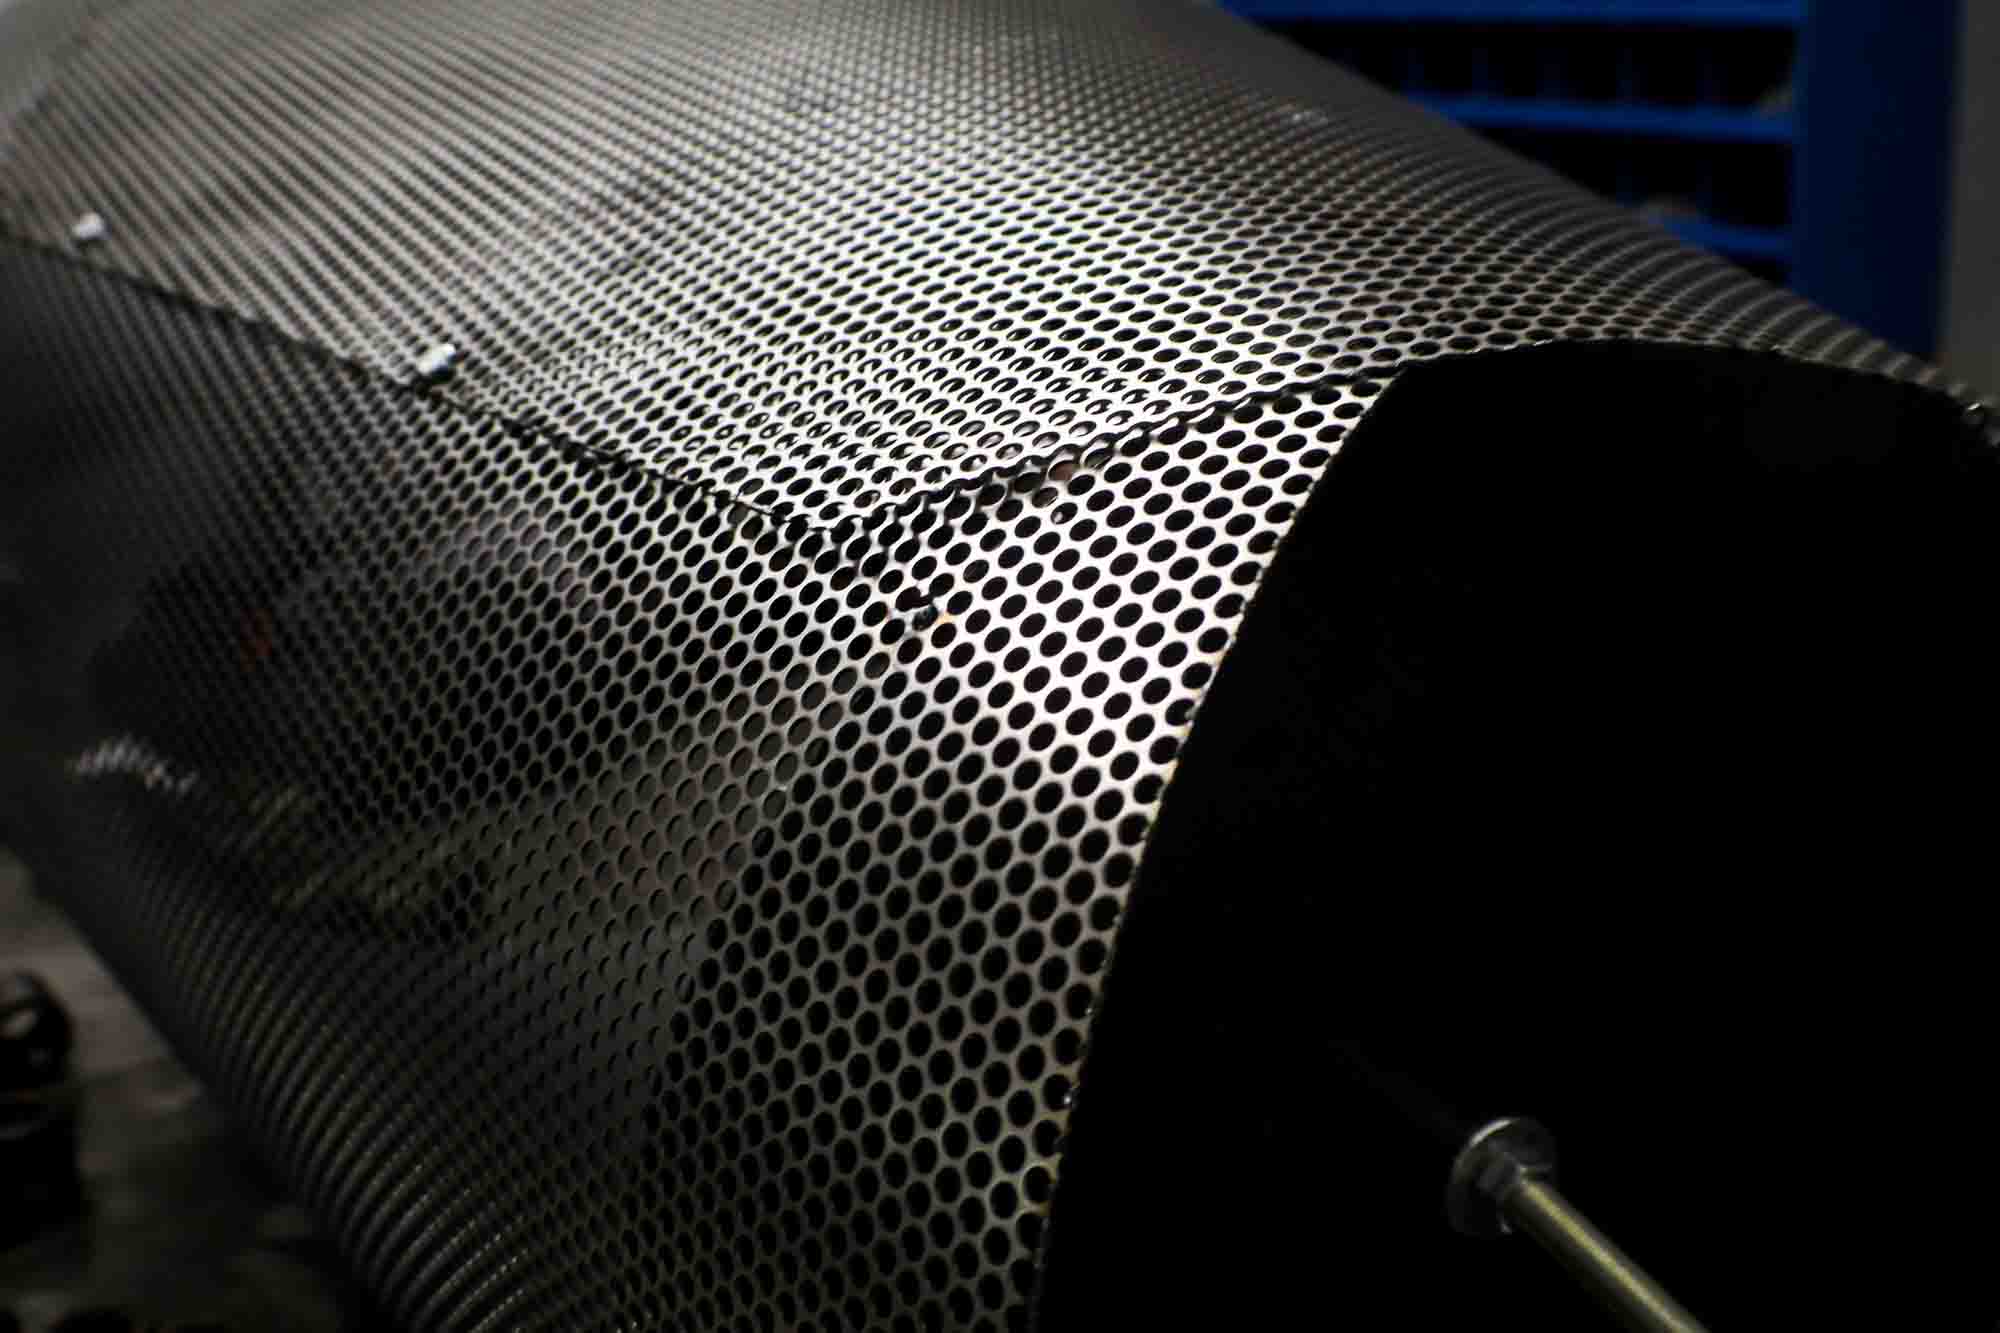 A sheet of Round Hole Perforated Metal that had been molded and formed into a light fixture.